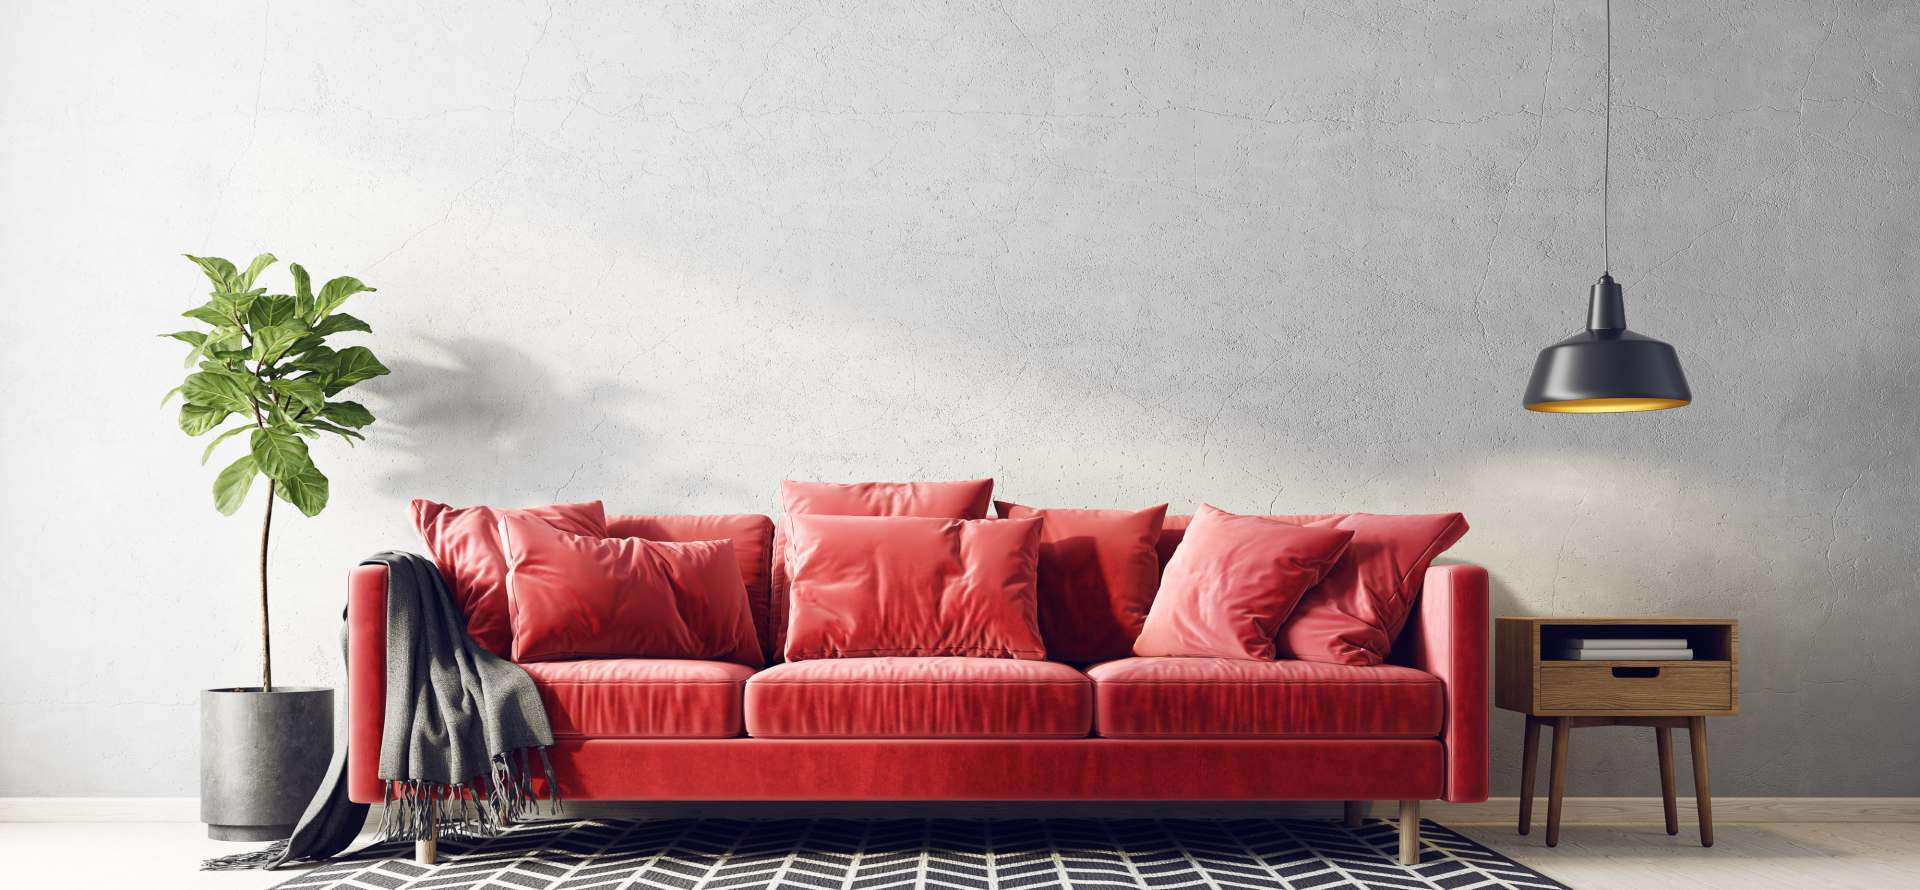 red couch in a living room with a rug, lamp and indoor plant